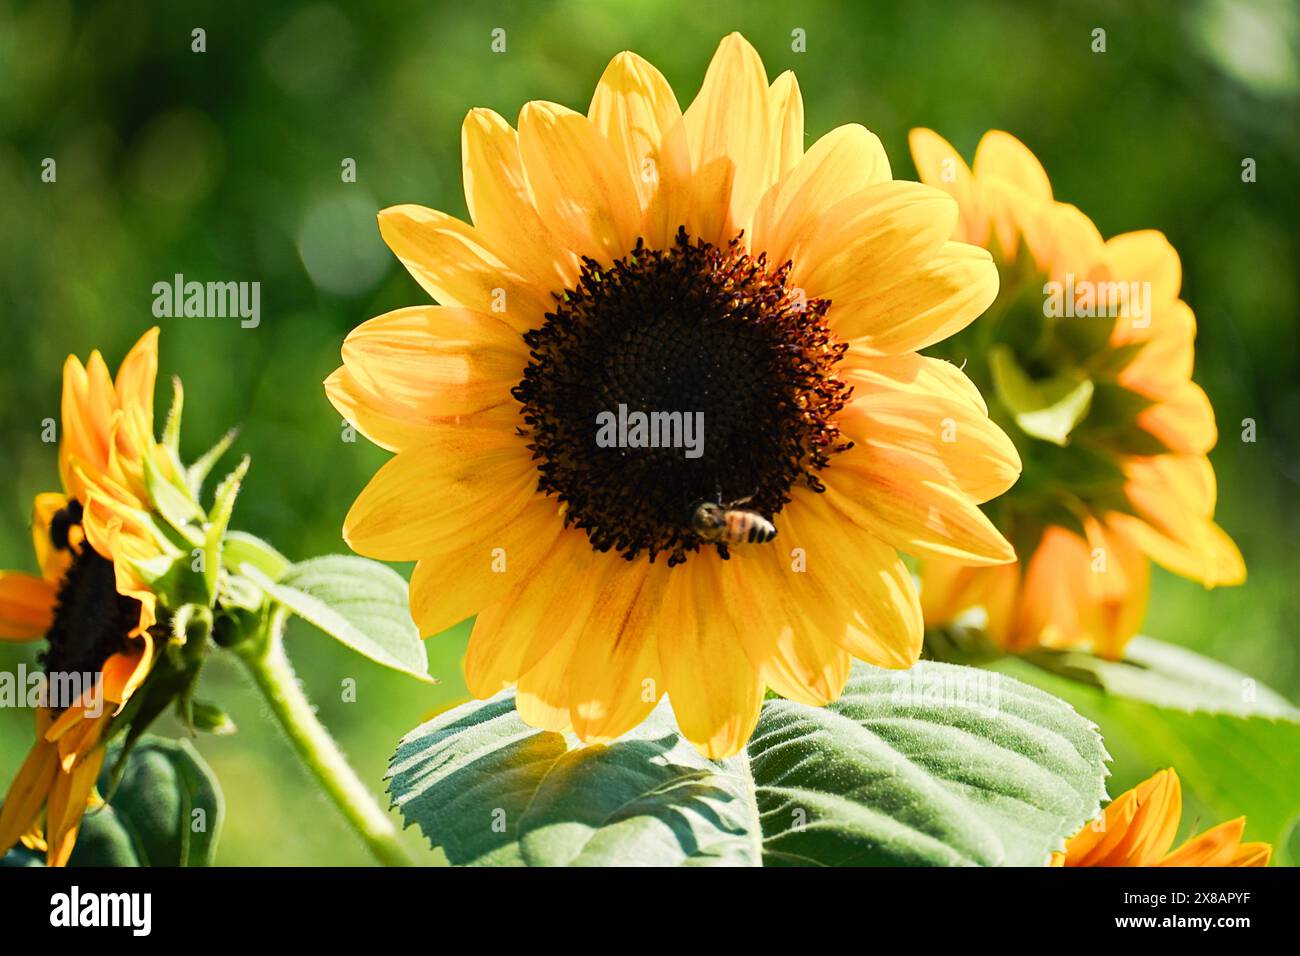 Bright yellow sunflower with a bee collecting nectar in a lush green background. Stock Photo